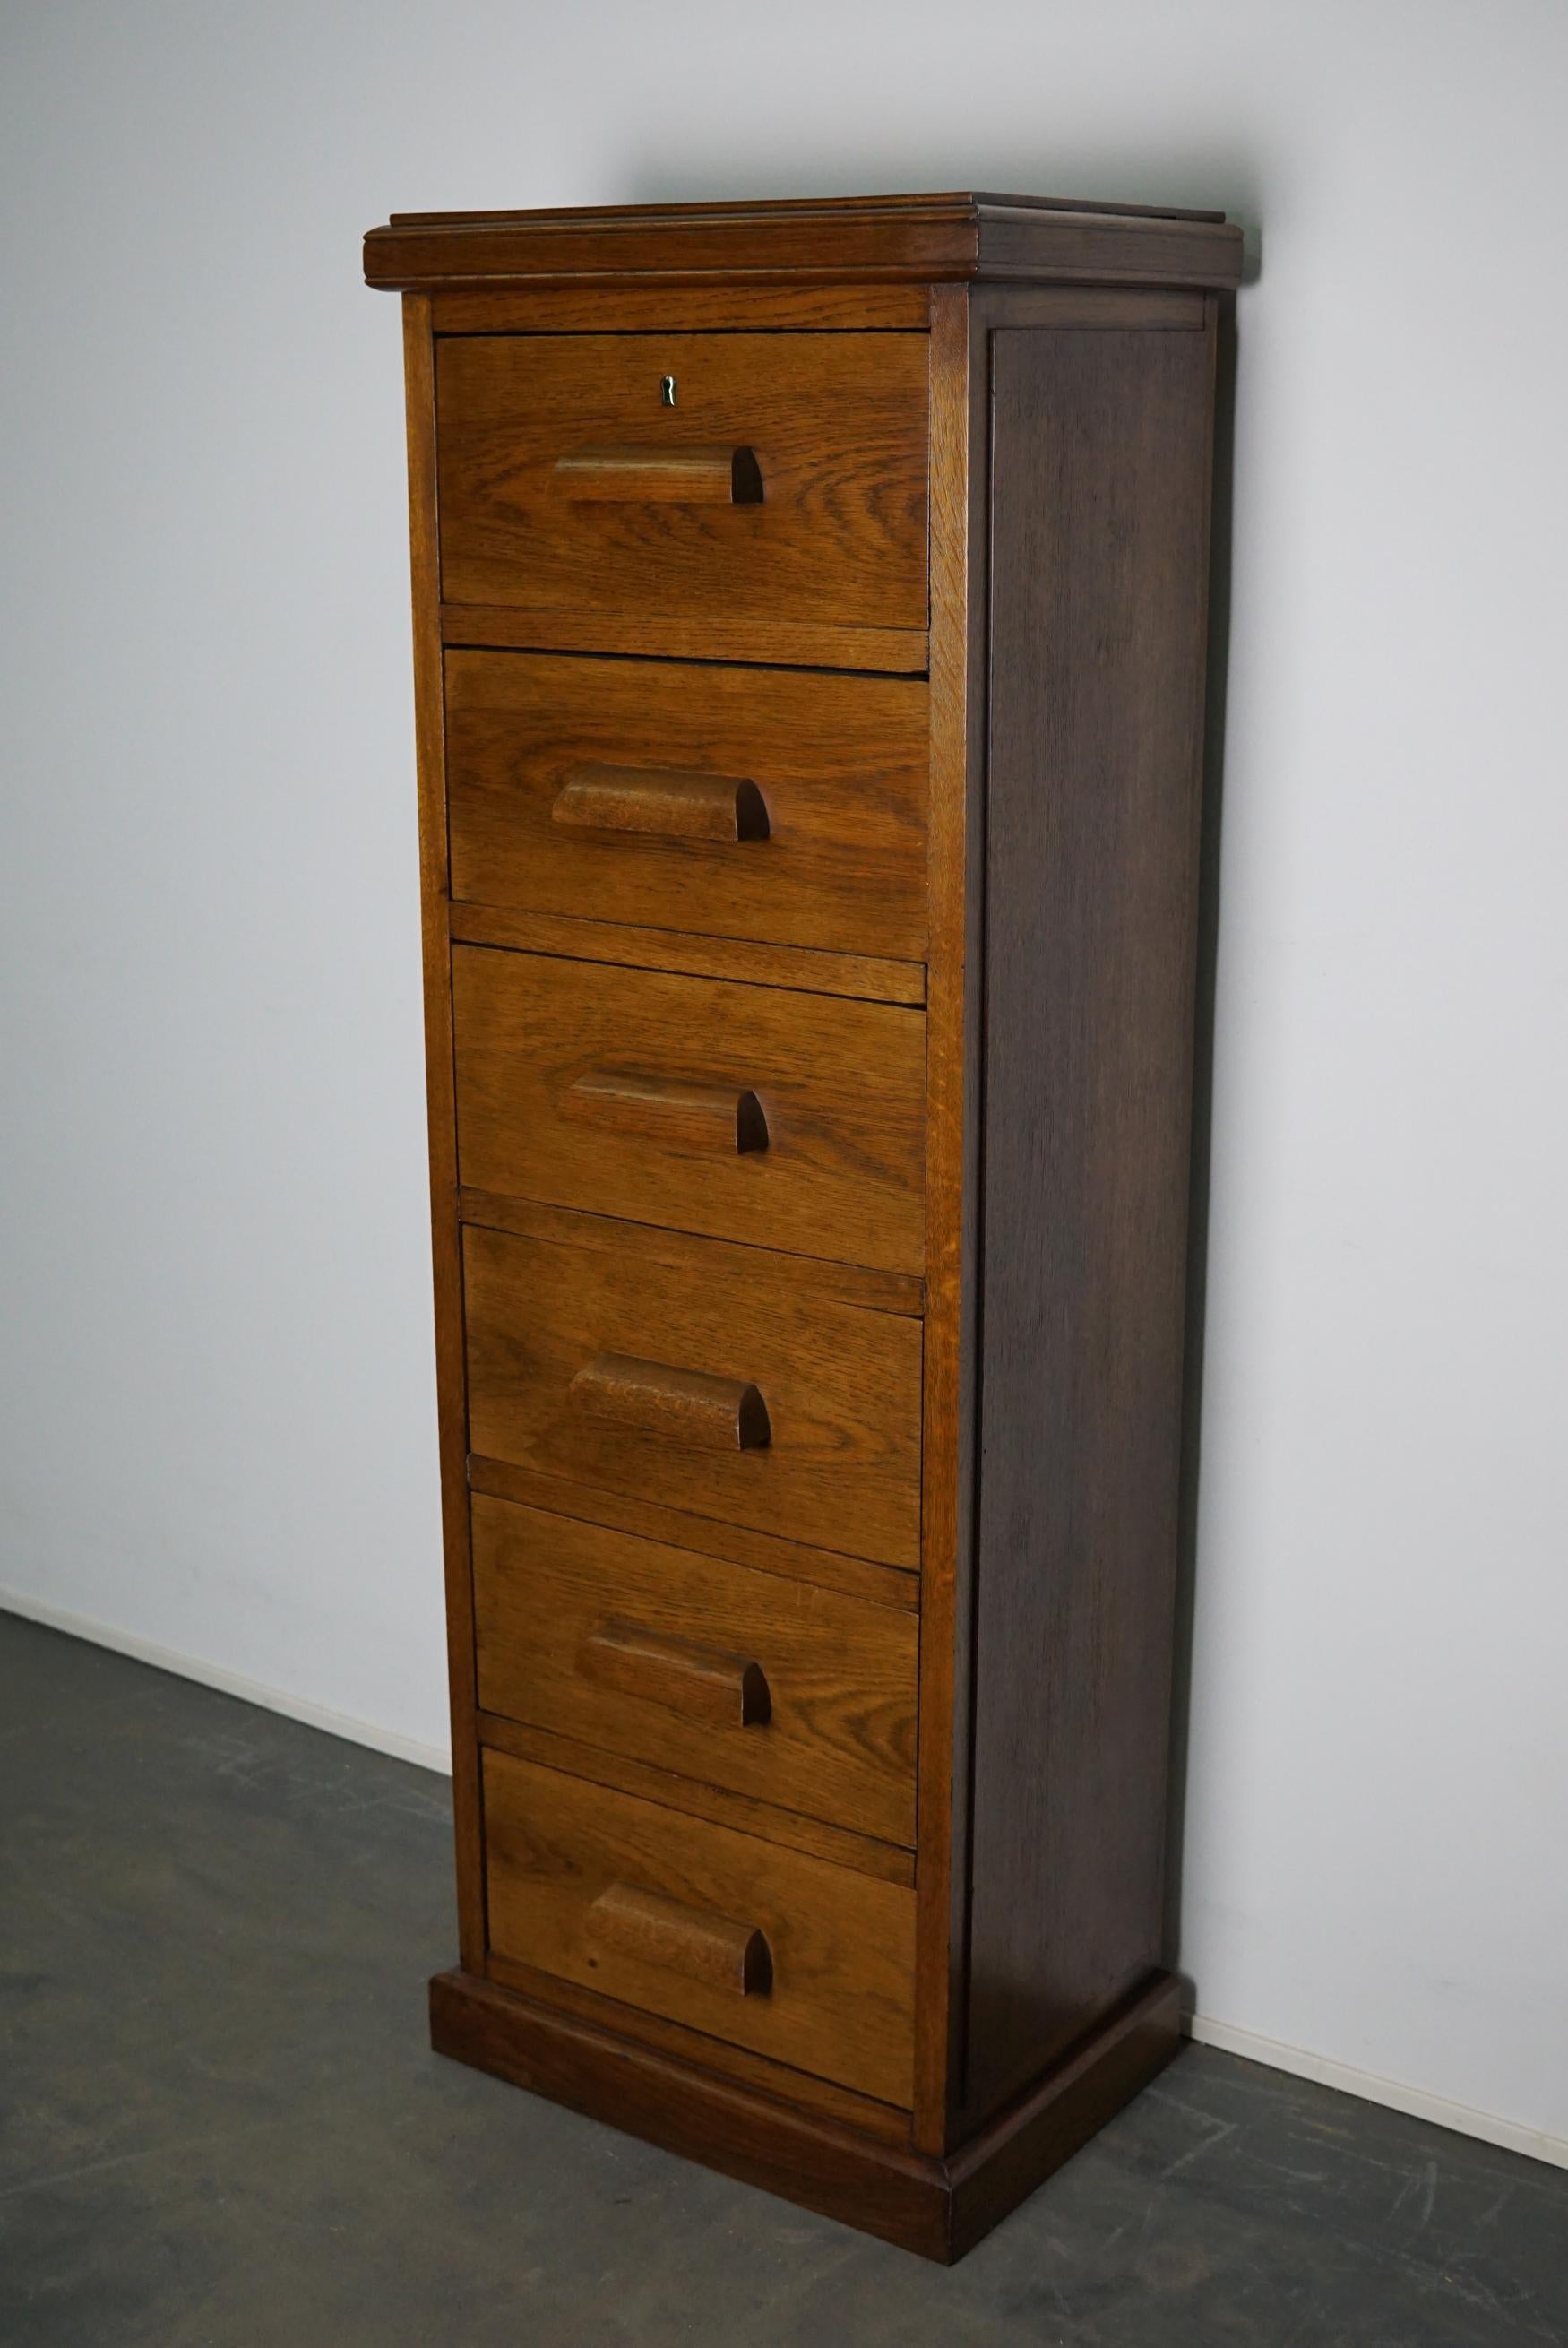 This apothecary cabinet was made circa 1930s in the Netherlands. It features 6 drawers with nice wooden handles. It is made from oak and it remains in a very good condition. The interior dimensions of the drawers are: D x W x H 27.5 x 41 x 17 cm.